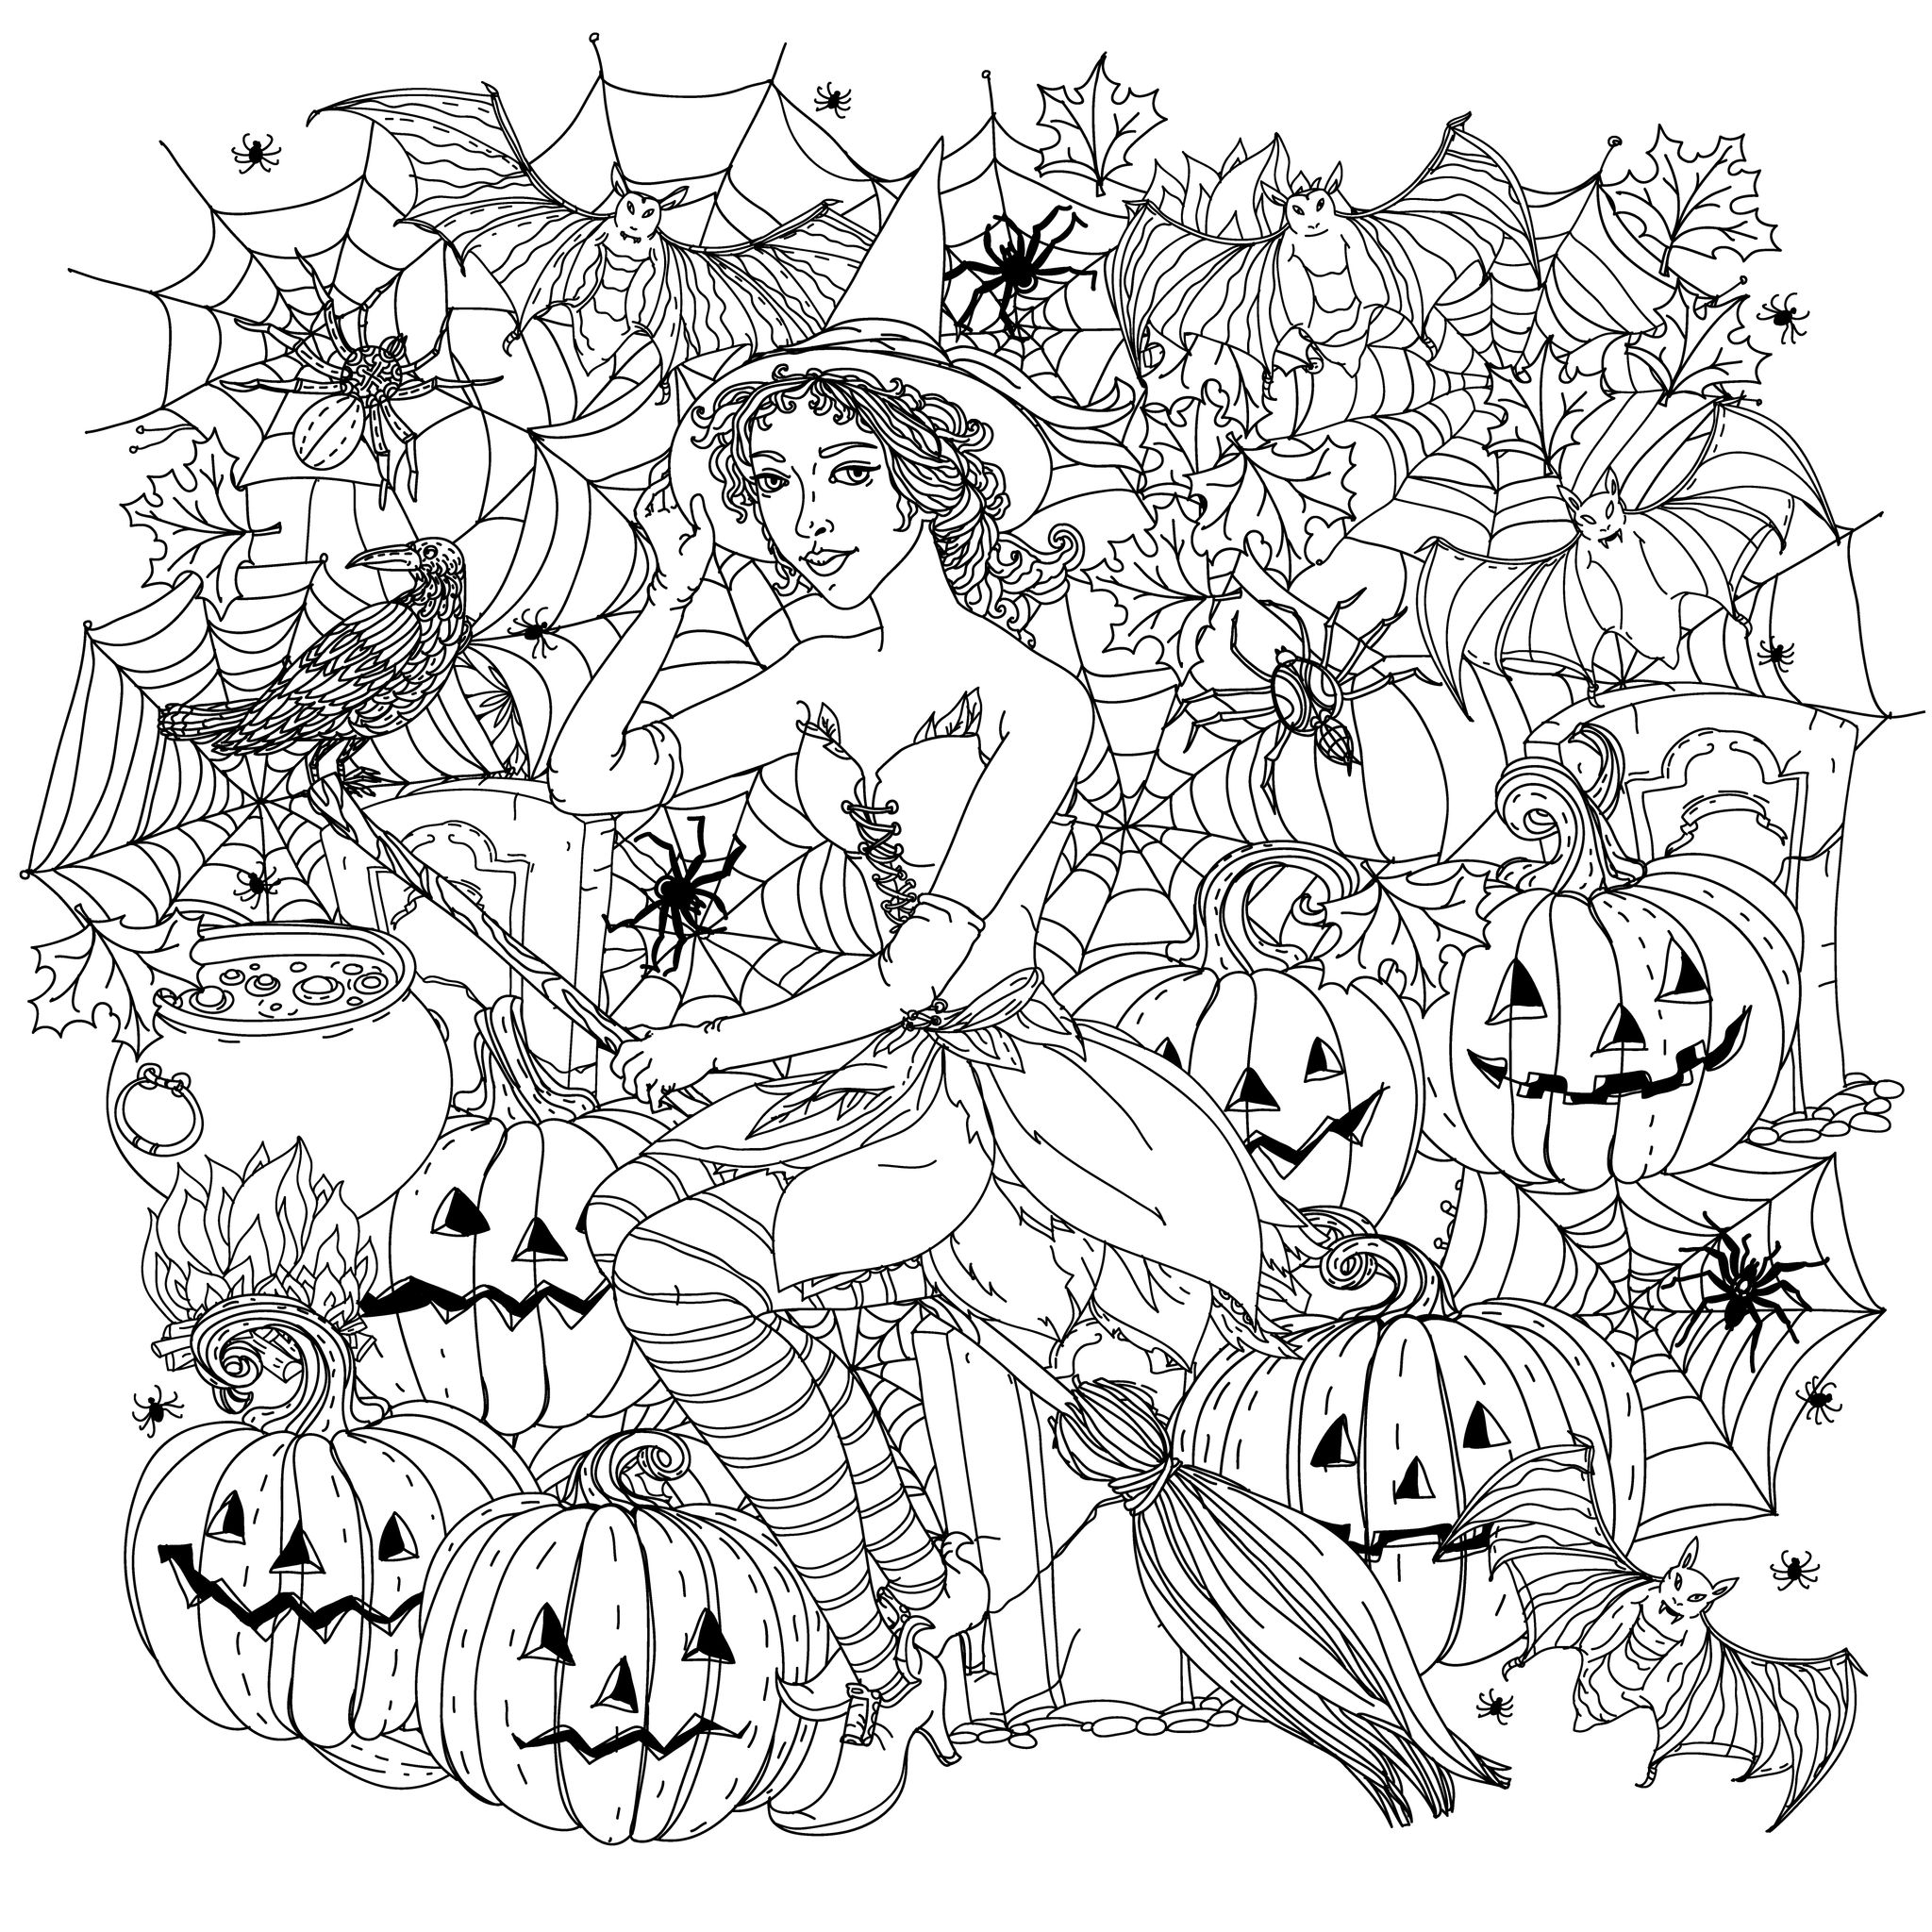 Halloween witch with pumpkins - Halloween Adult Coloring Pages